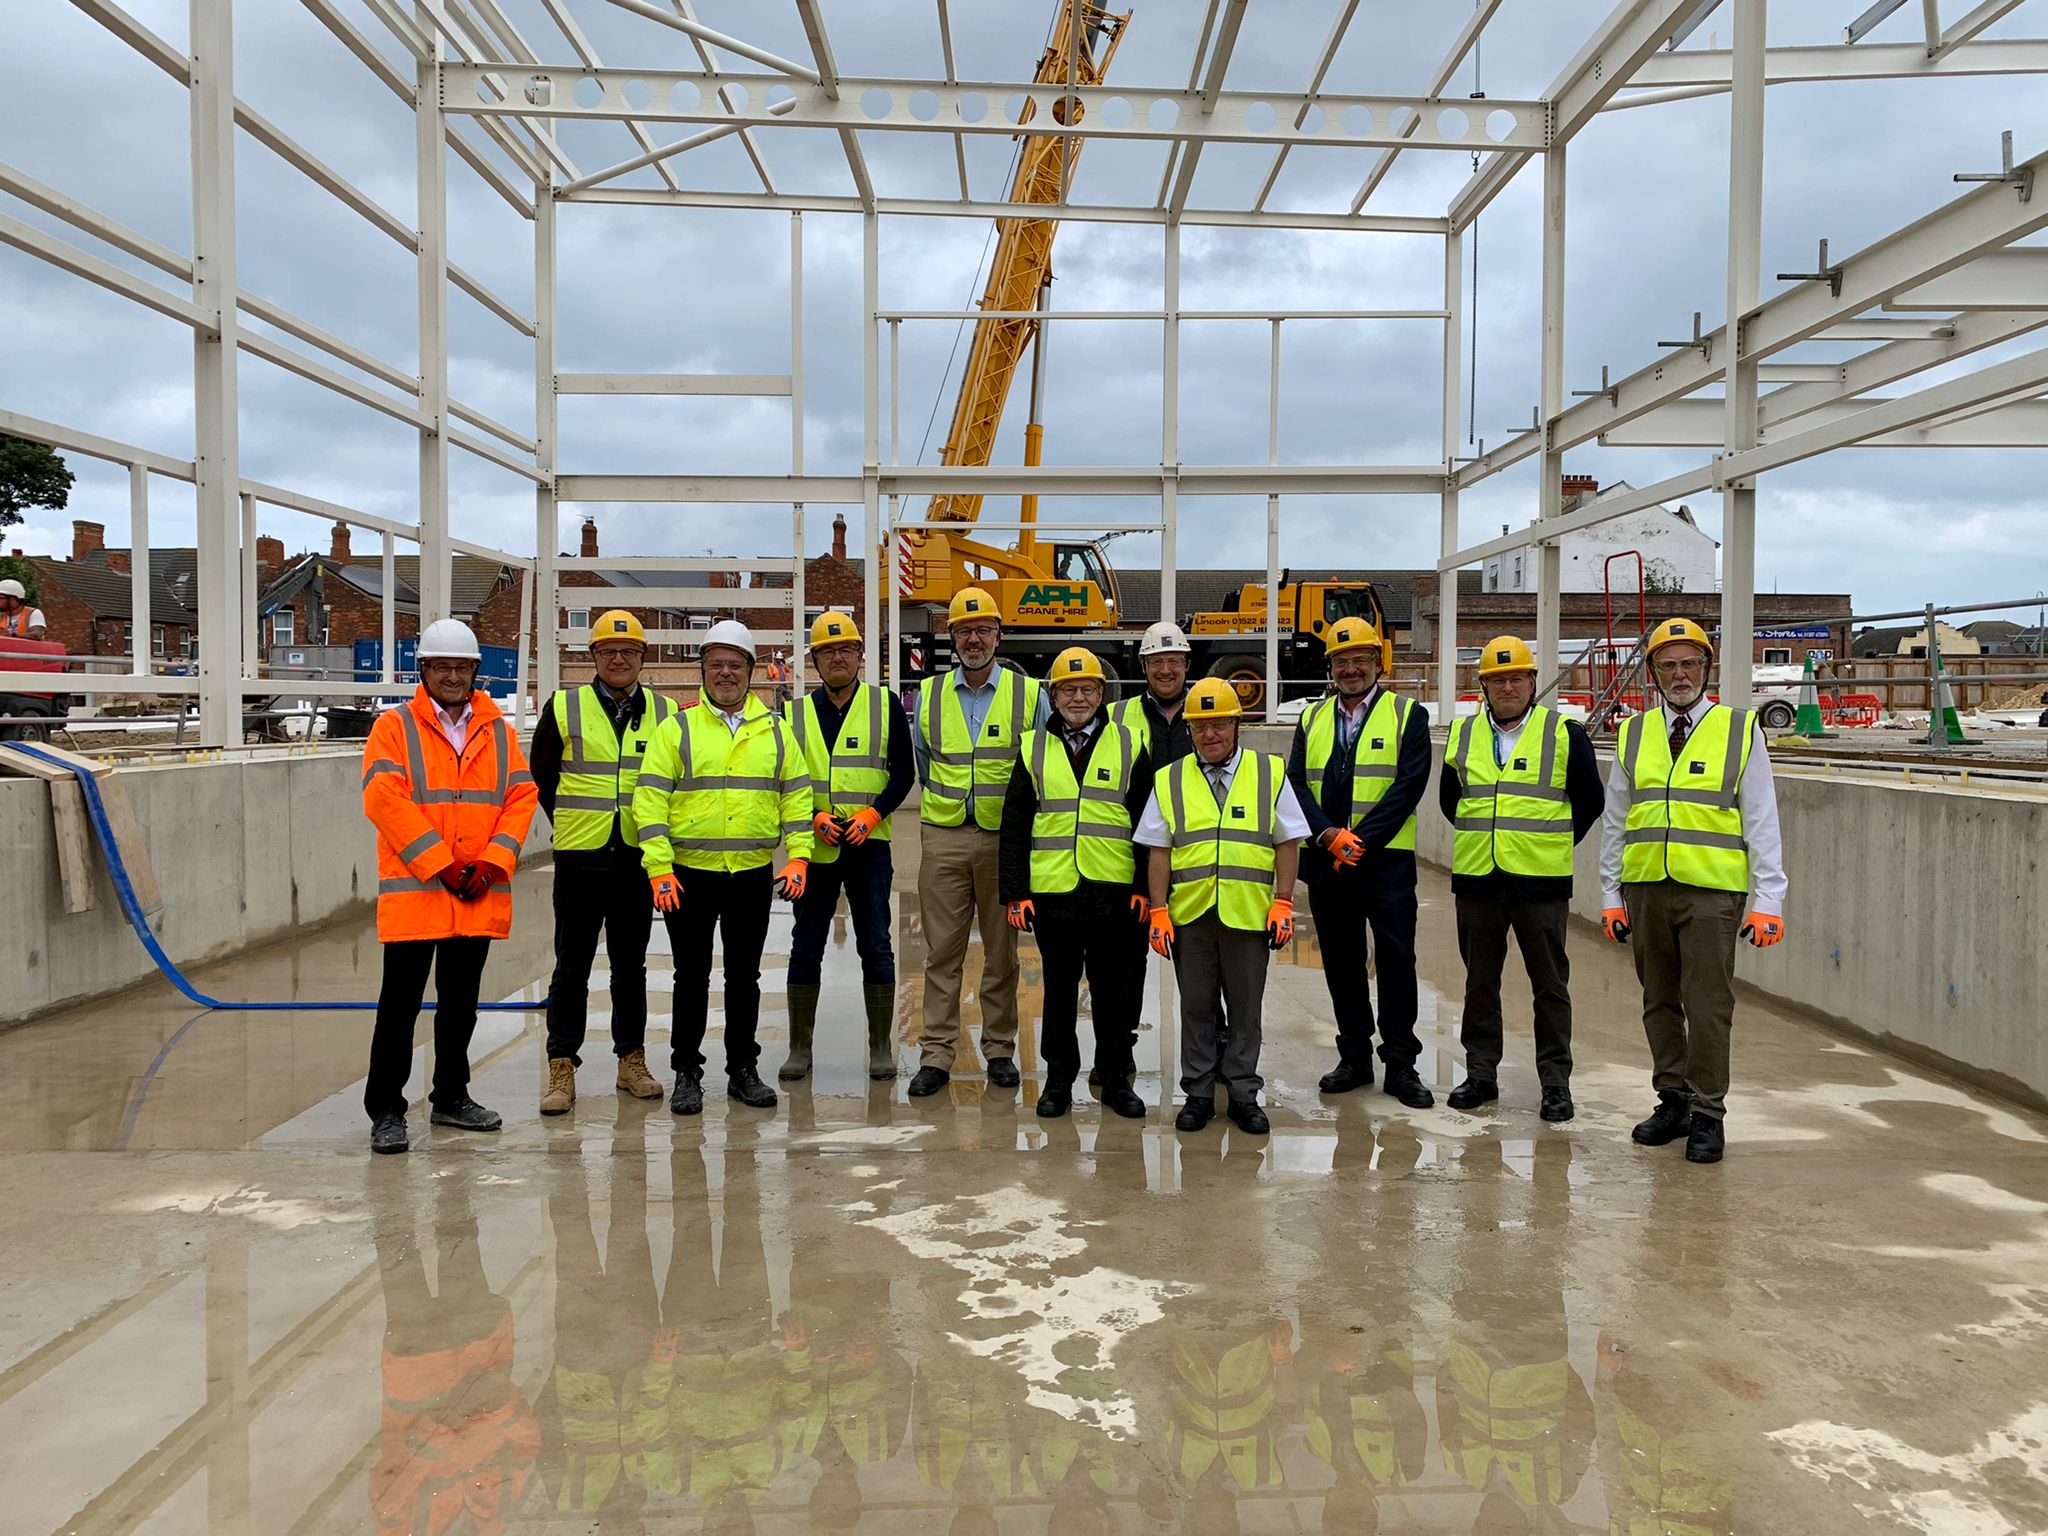 Mablethorpe’s new swimming pool starts to be tested with water as construction milestone reached